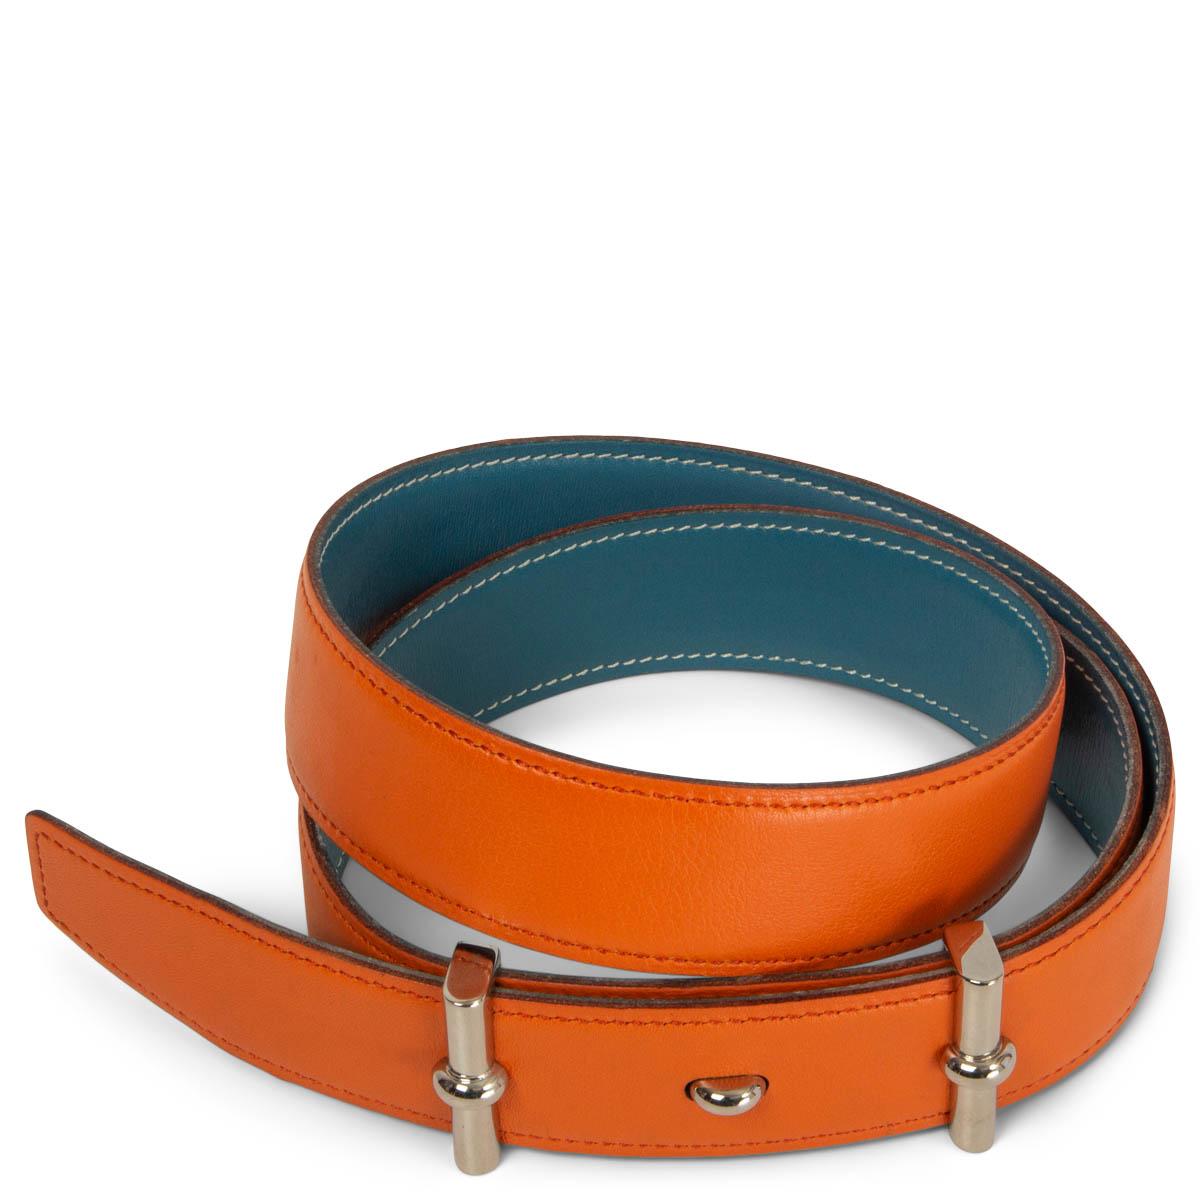 100% authentic Hermès Reversible 32mm Belt in Orange and Blue Jean Swift leather. Has been worn and shows some soft wear on the leather. Overall in very good condition. 

Measurements
Tag Size	75
Width	3.2cm (1.2in)
Fits	72cm (28.1in) to 78cm